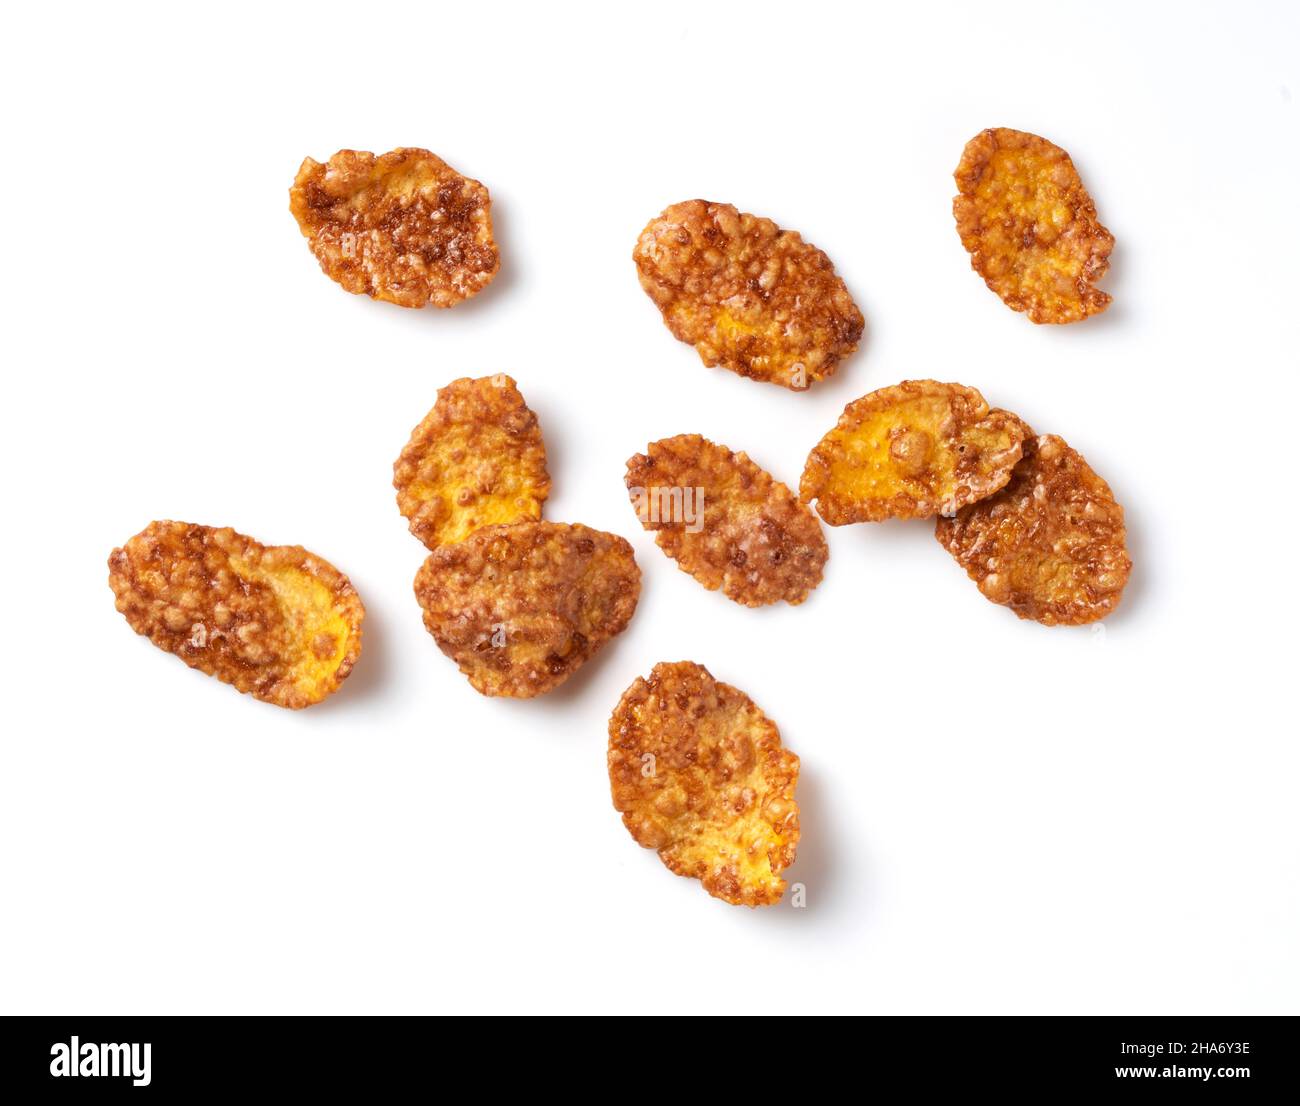 Chocolate cornflakes placed on a white background. View from directly above. Stock Photo